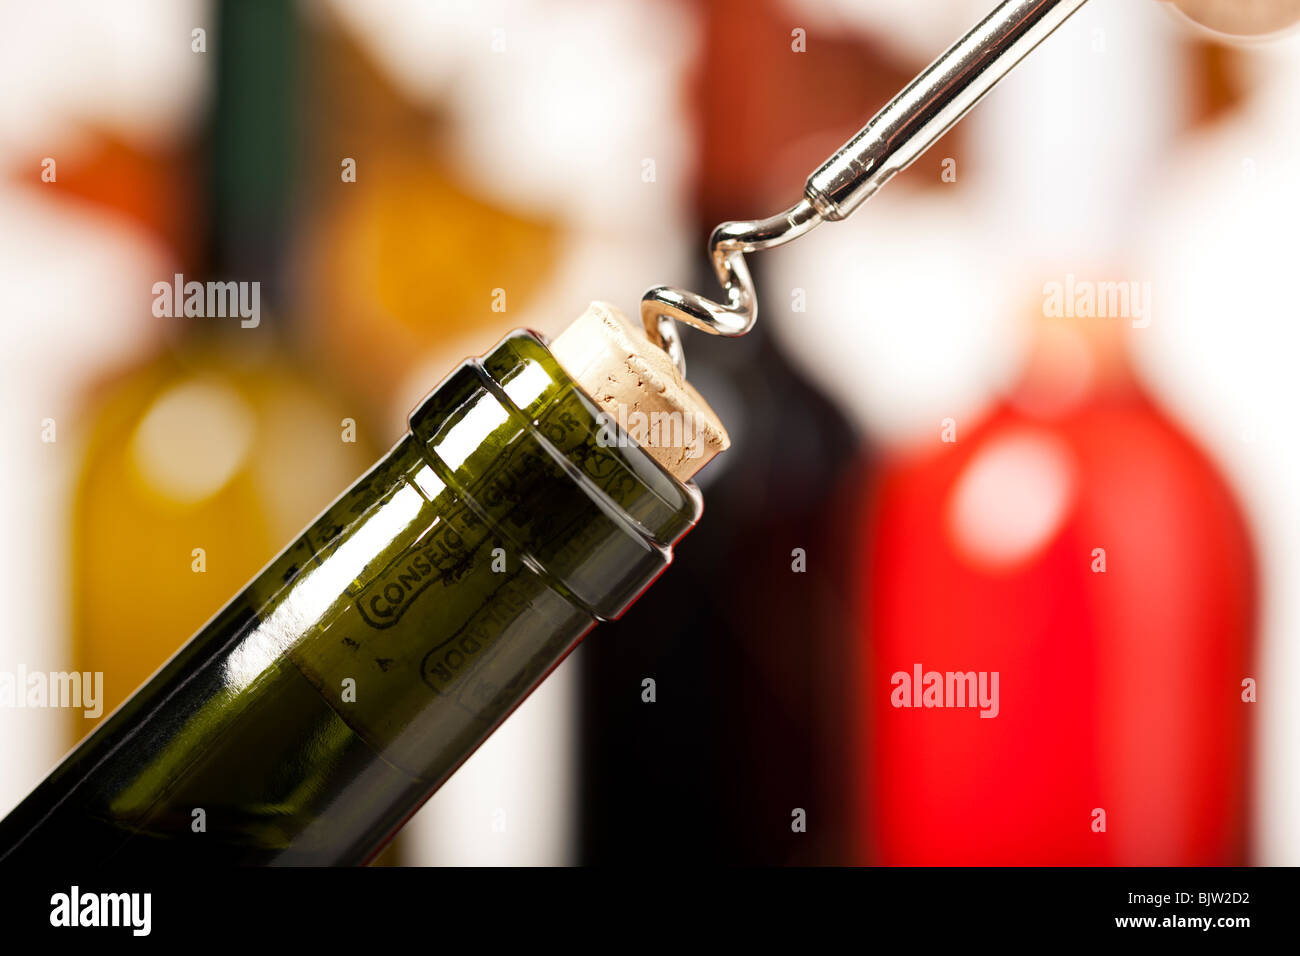 opening a bottle of Rioja wine with a corkscew, closeup, blurred wine bottles in background Stock Photo